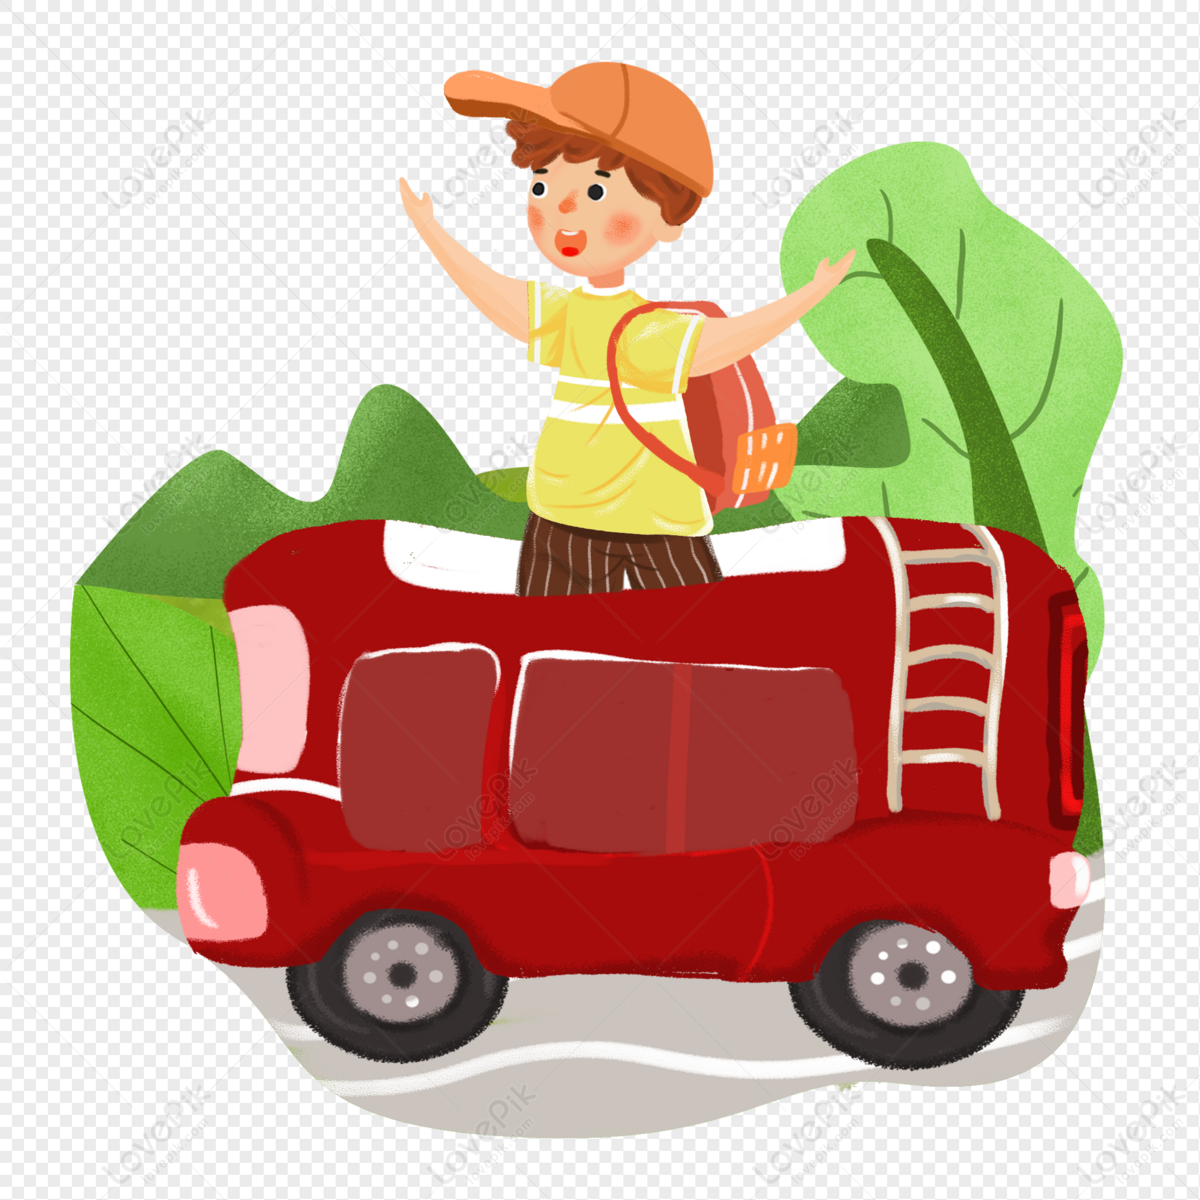 Little Boy On Vacation Traveling Cartoon Car PNG Transparent Image And  Clipart Image For Free Download - Lovepik | 401563437